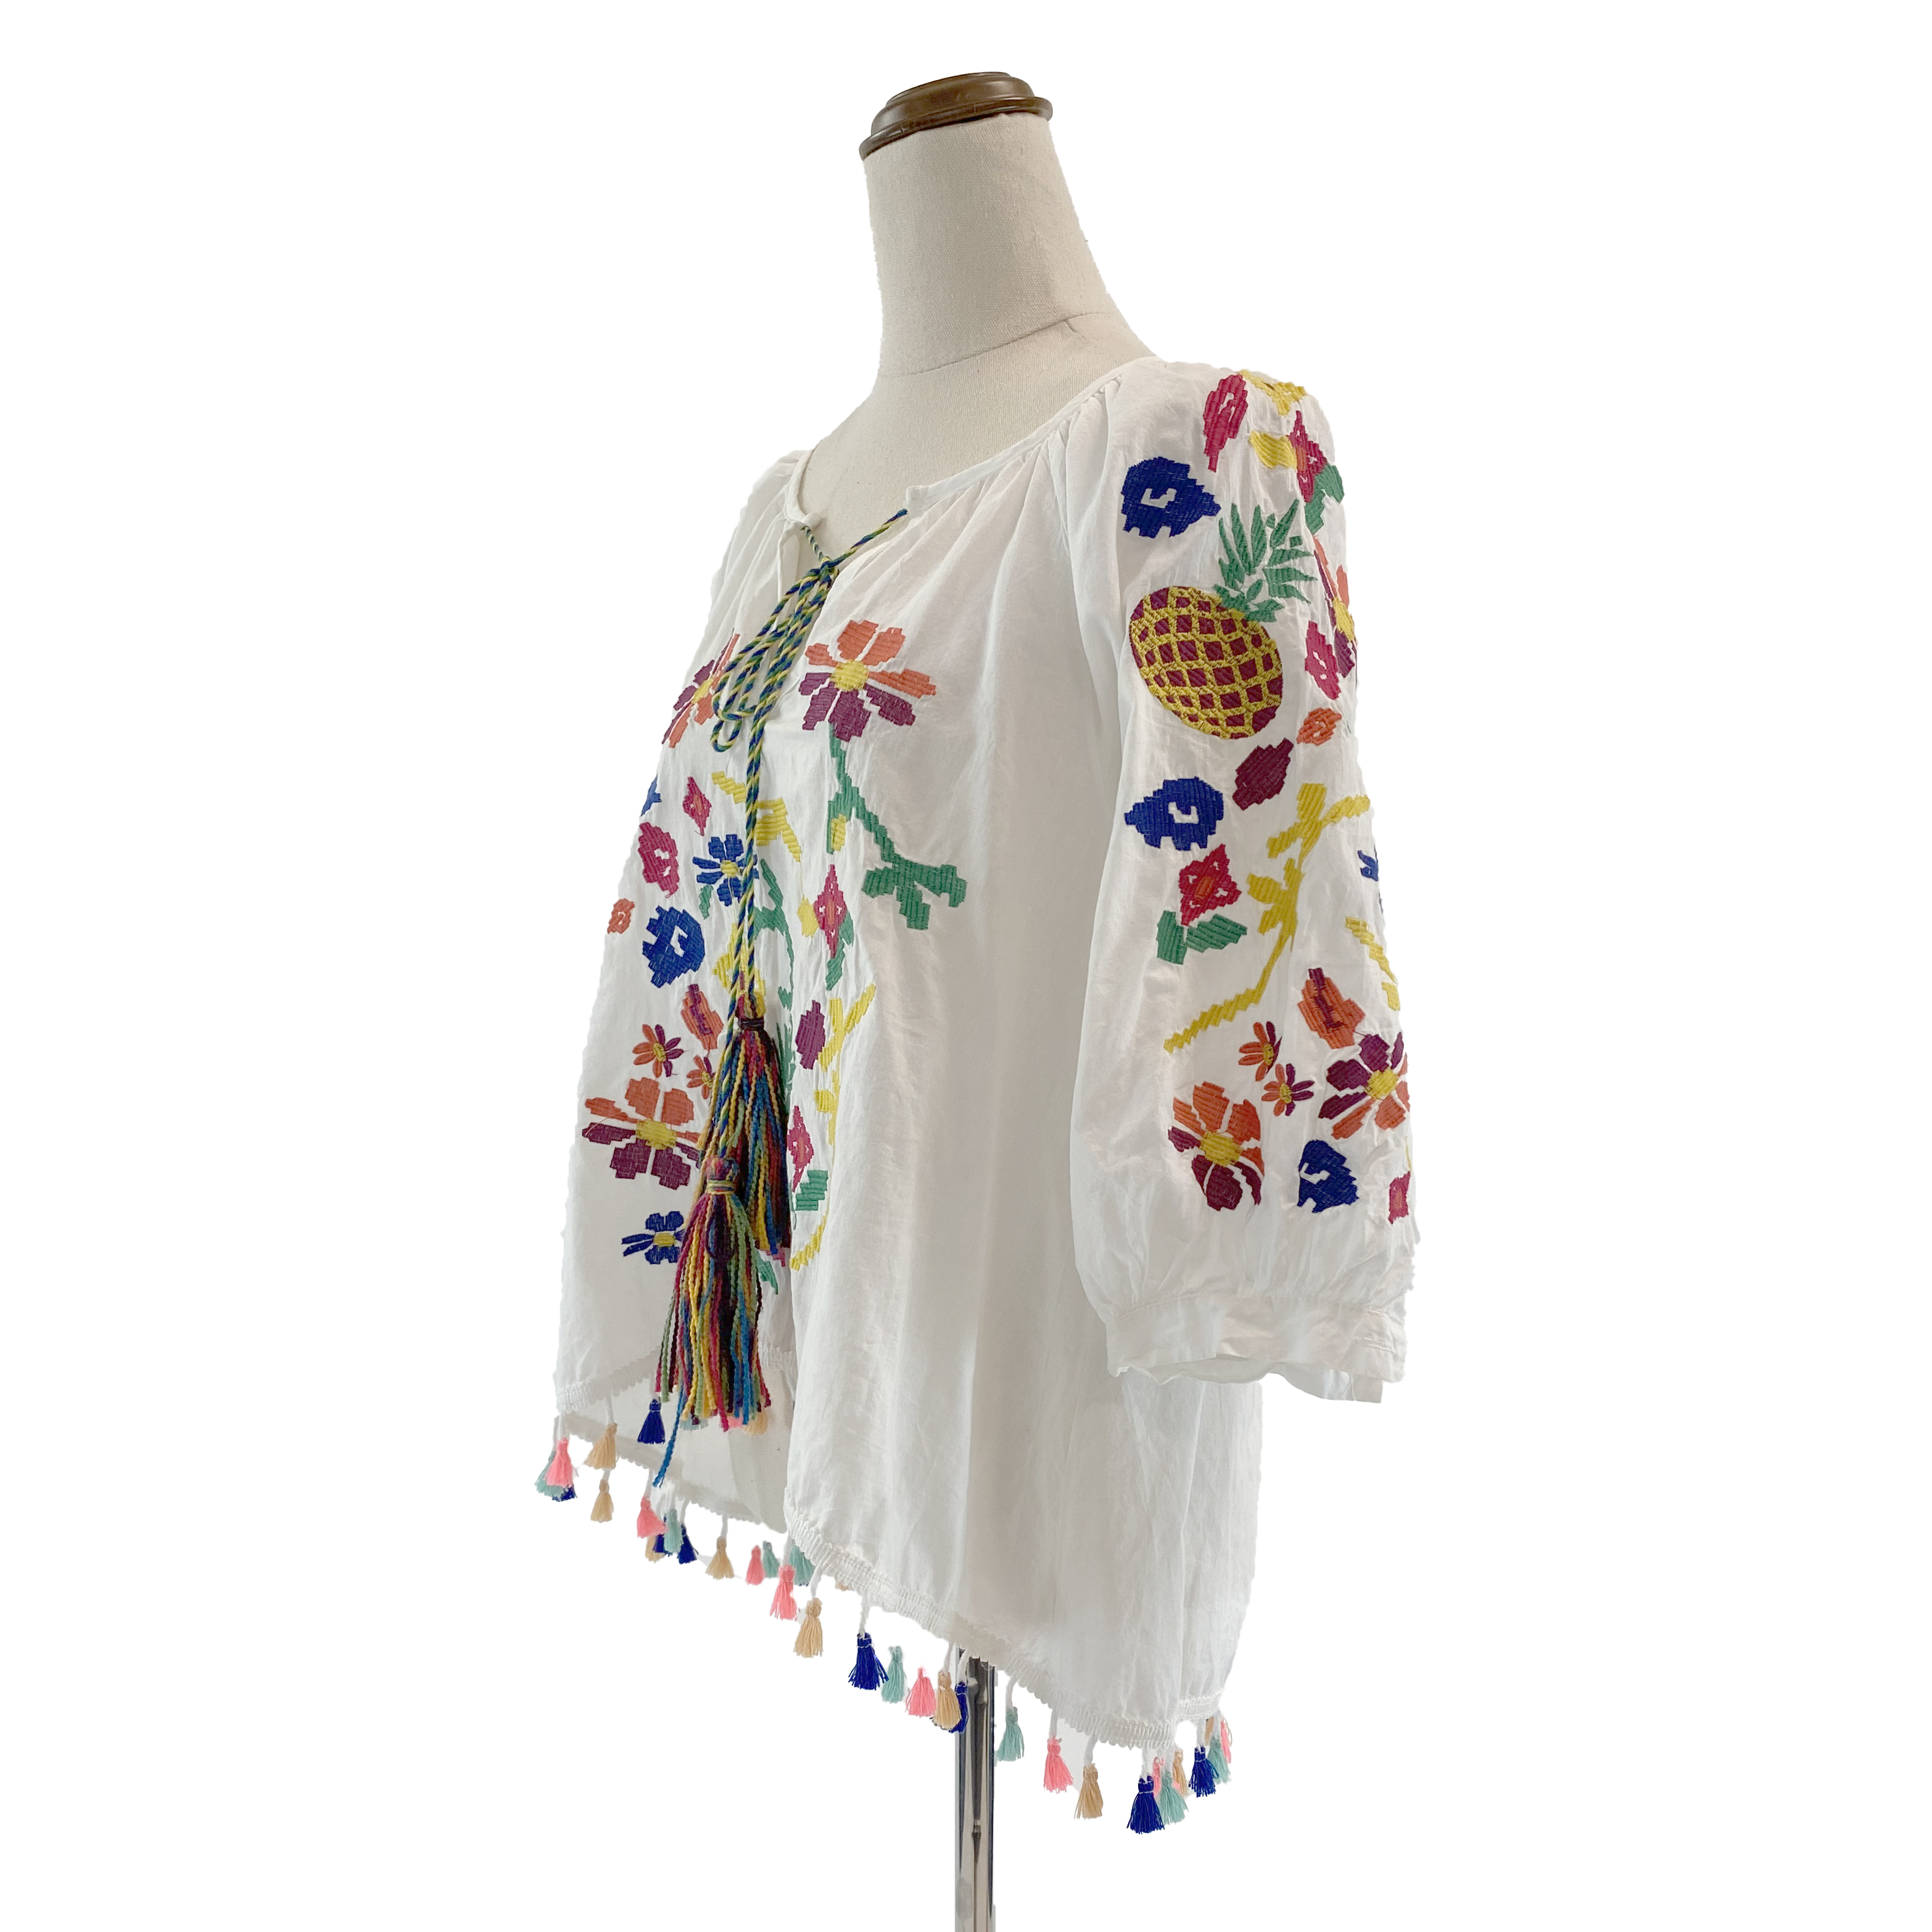 Ava Ruby Colourful Embroidered Peasant Top - White